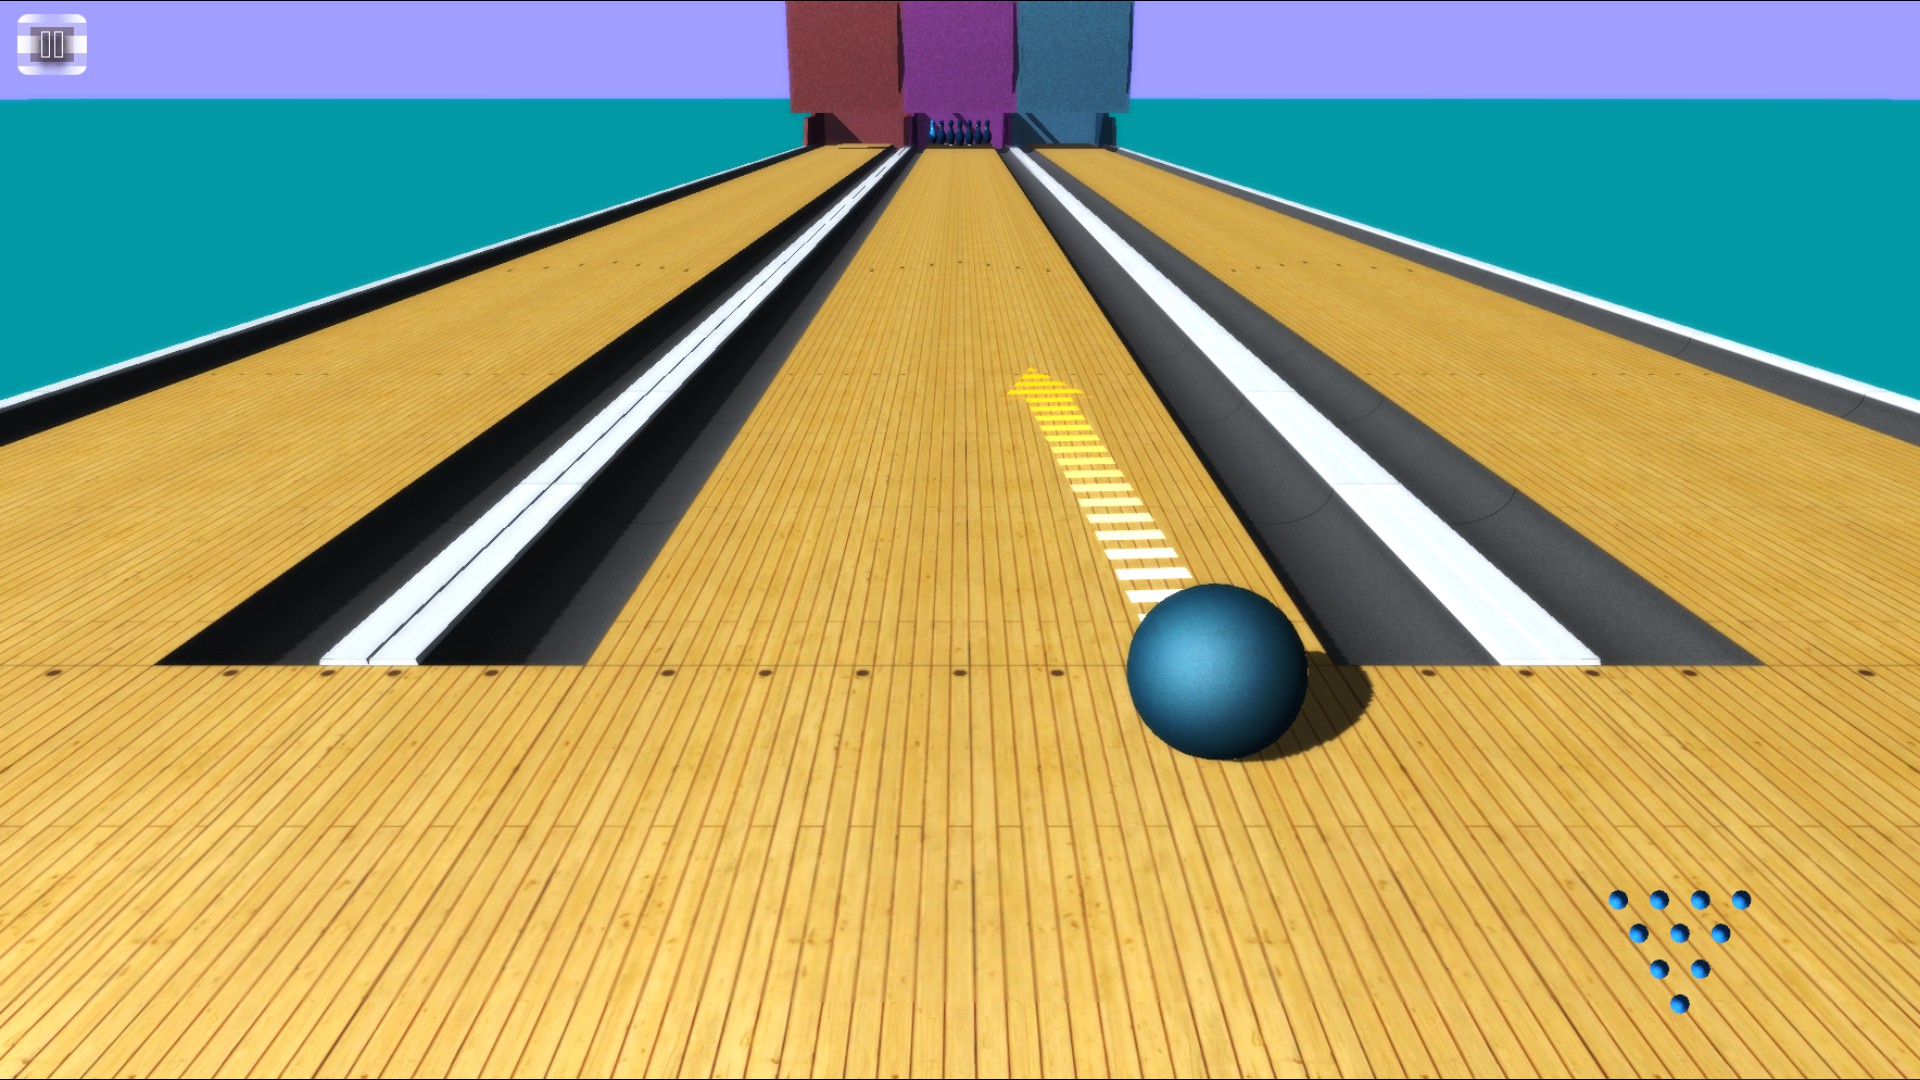 District 112 Incident: Bowling Alley screenshot